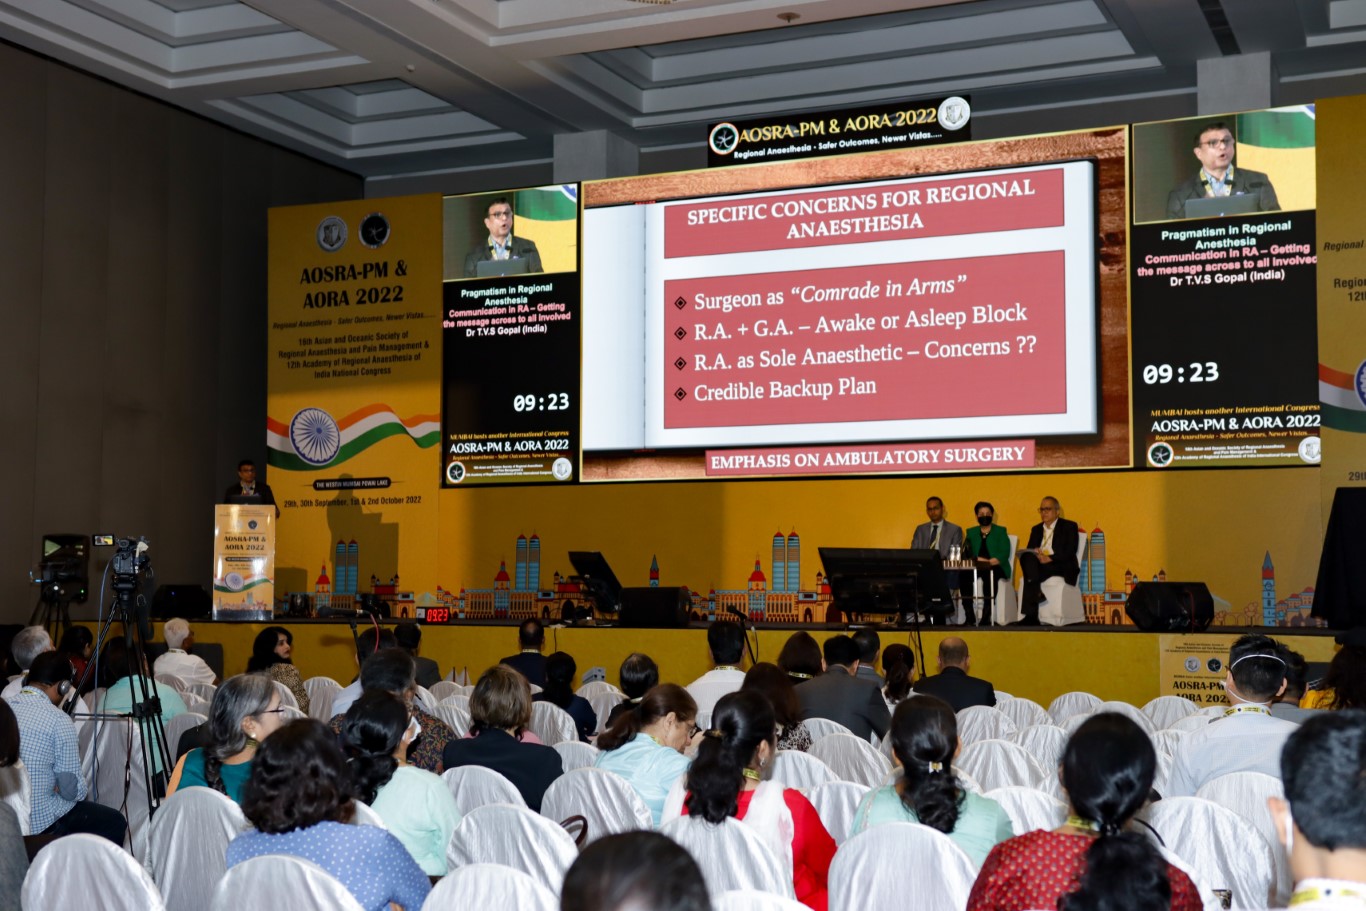 AORA INDIA - MORNING SESSION - HALL A